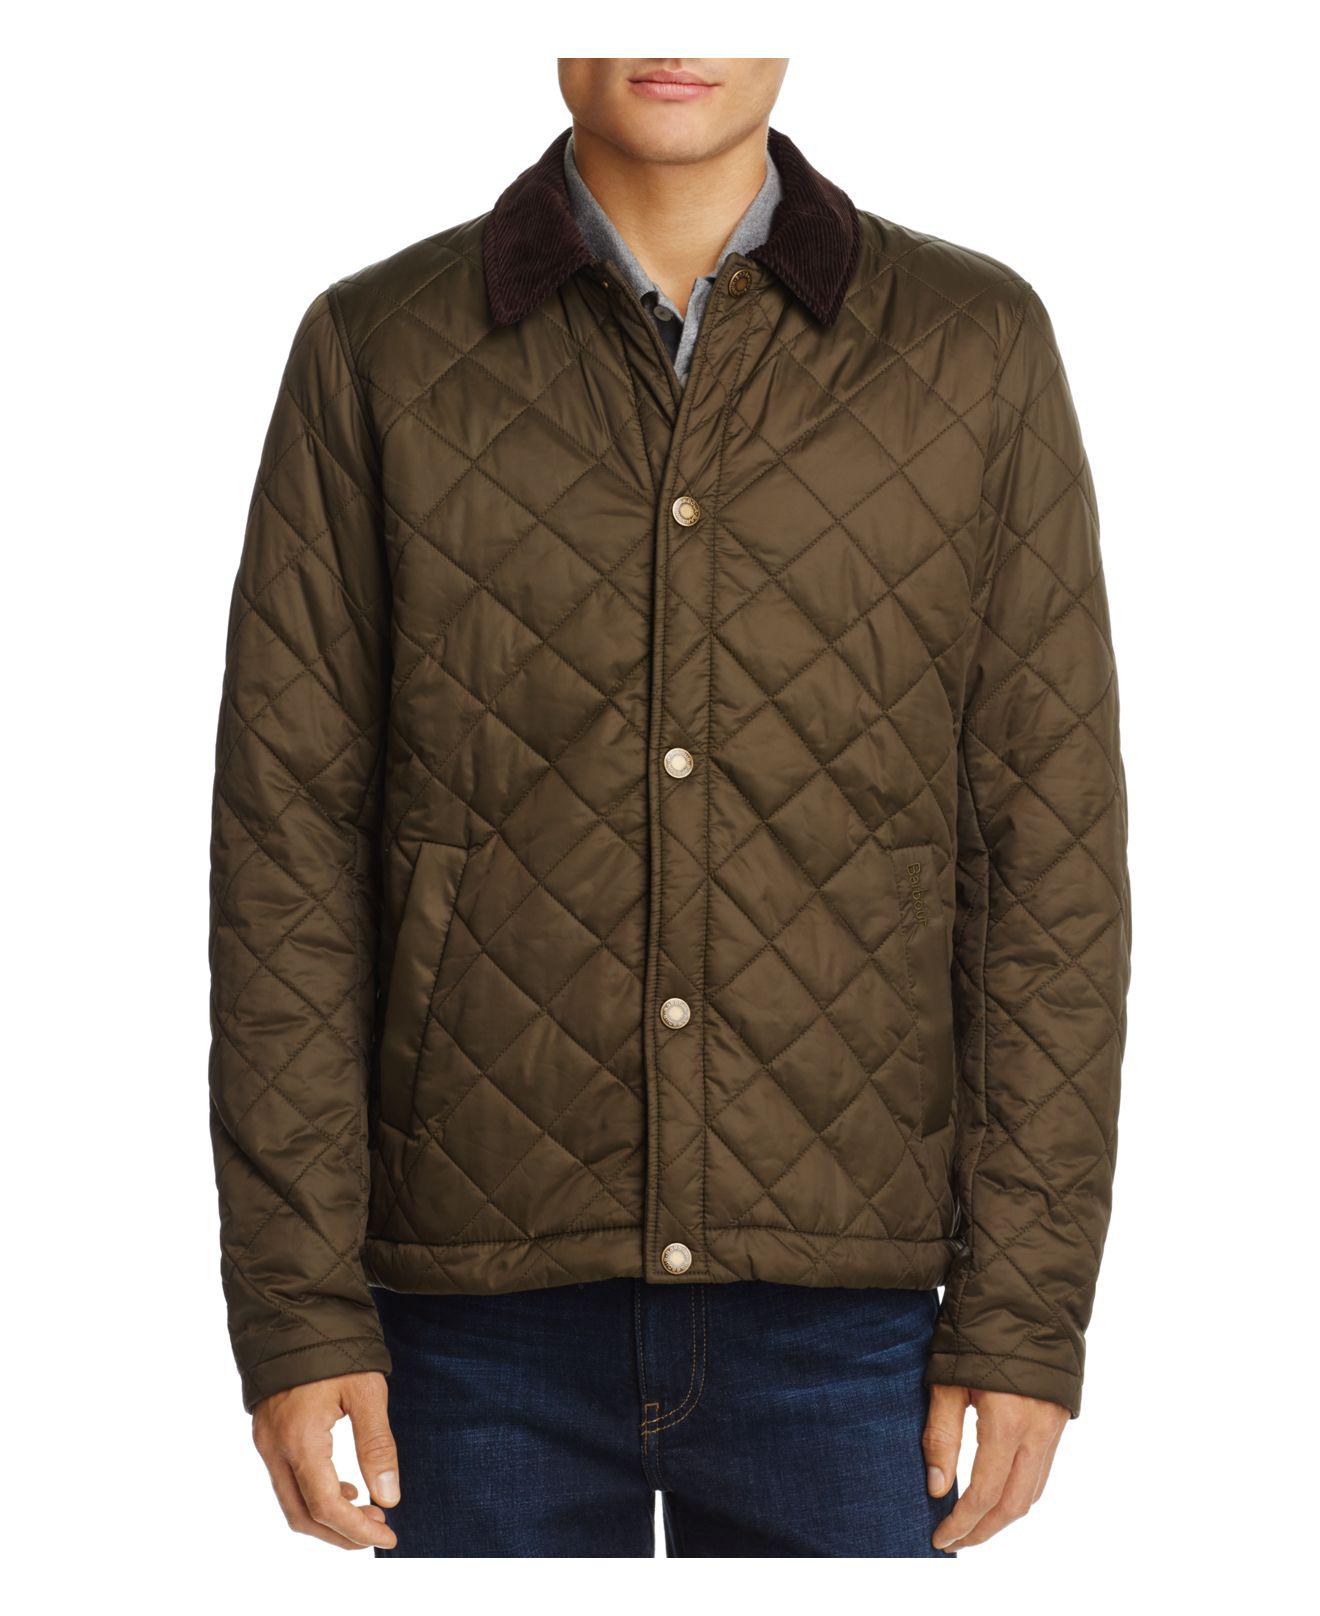 Barbour Holme Quilted Jacket in Olive 